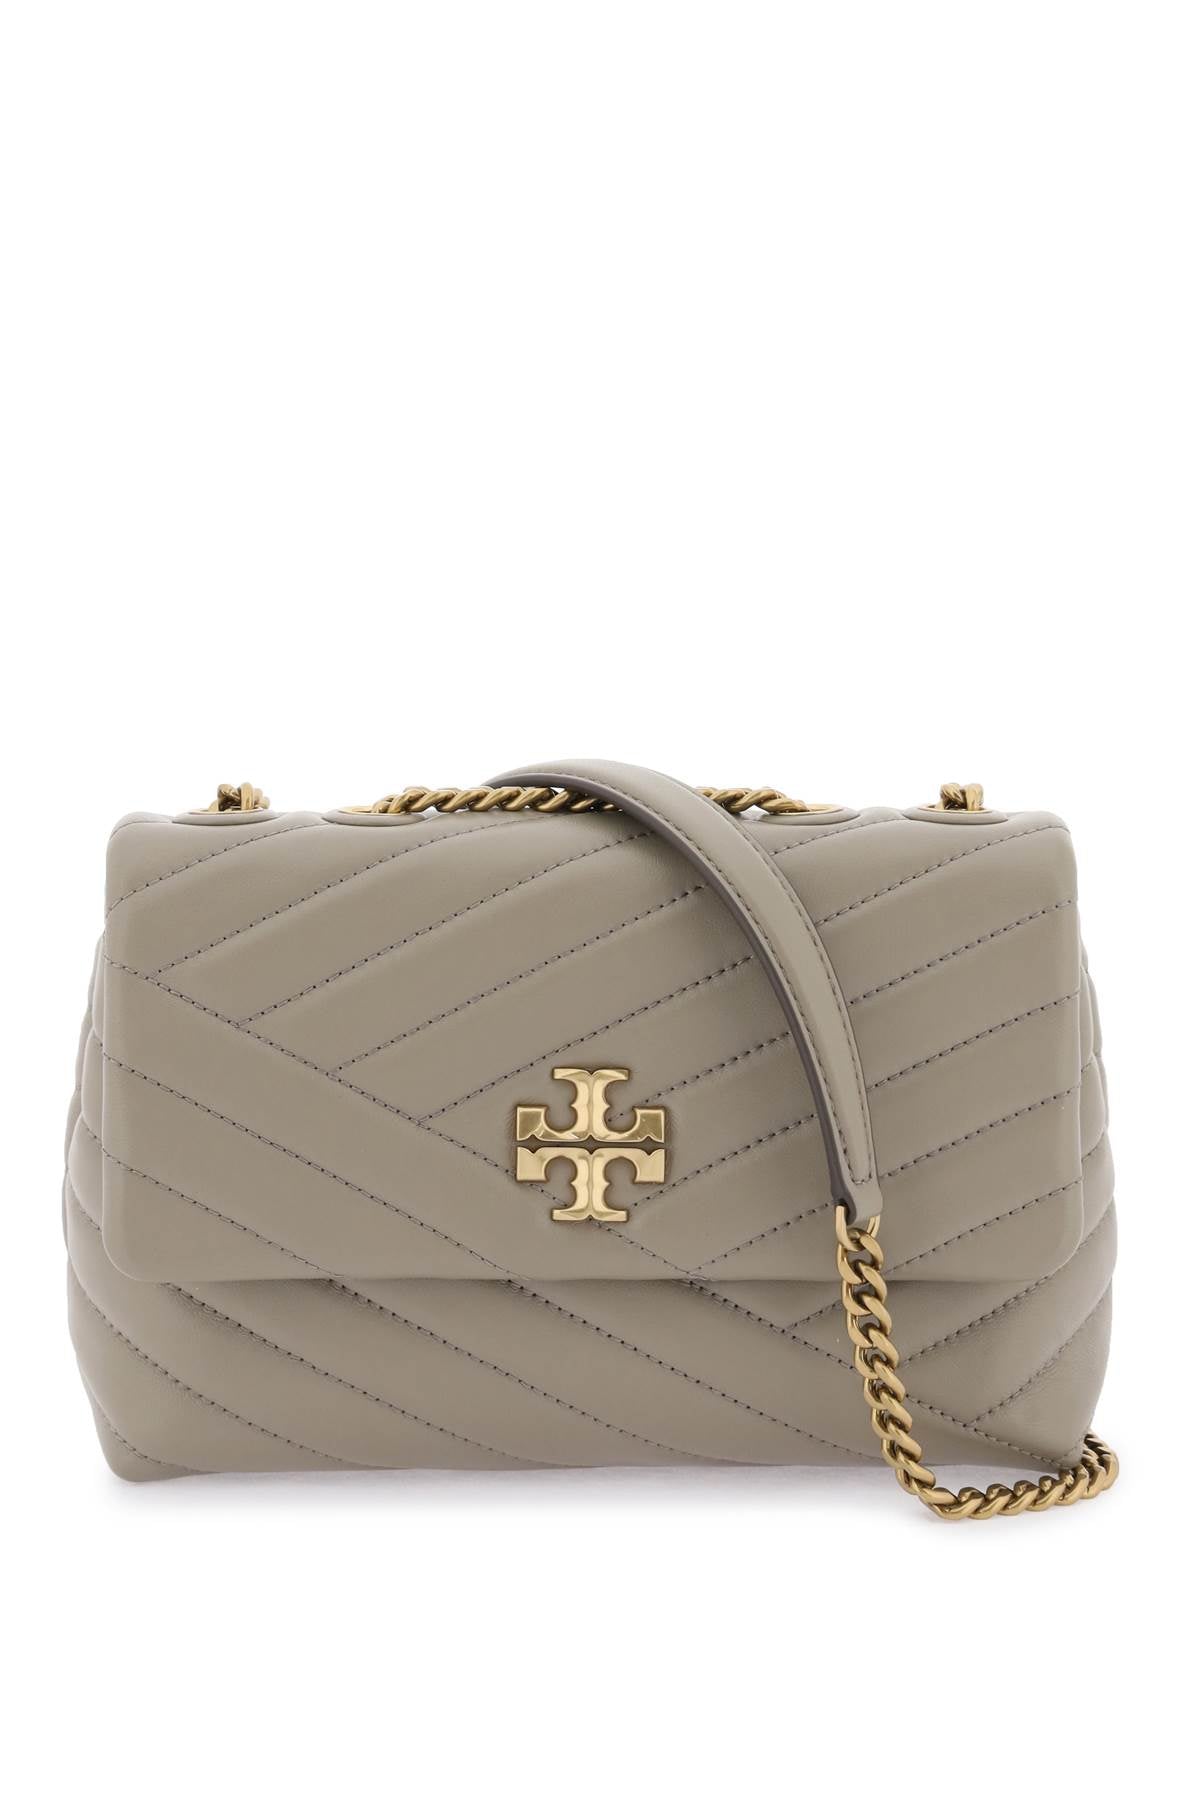 TORY BURCH Small Kira Chevron Quilted Leather Shoulder Bag in Gray with Iconic Metal Logo and Chain Strap